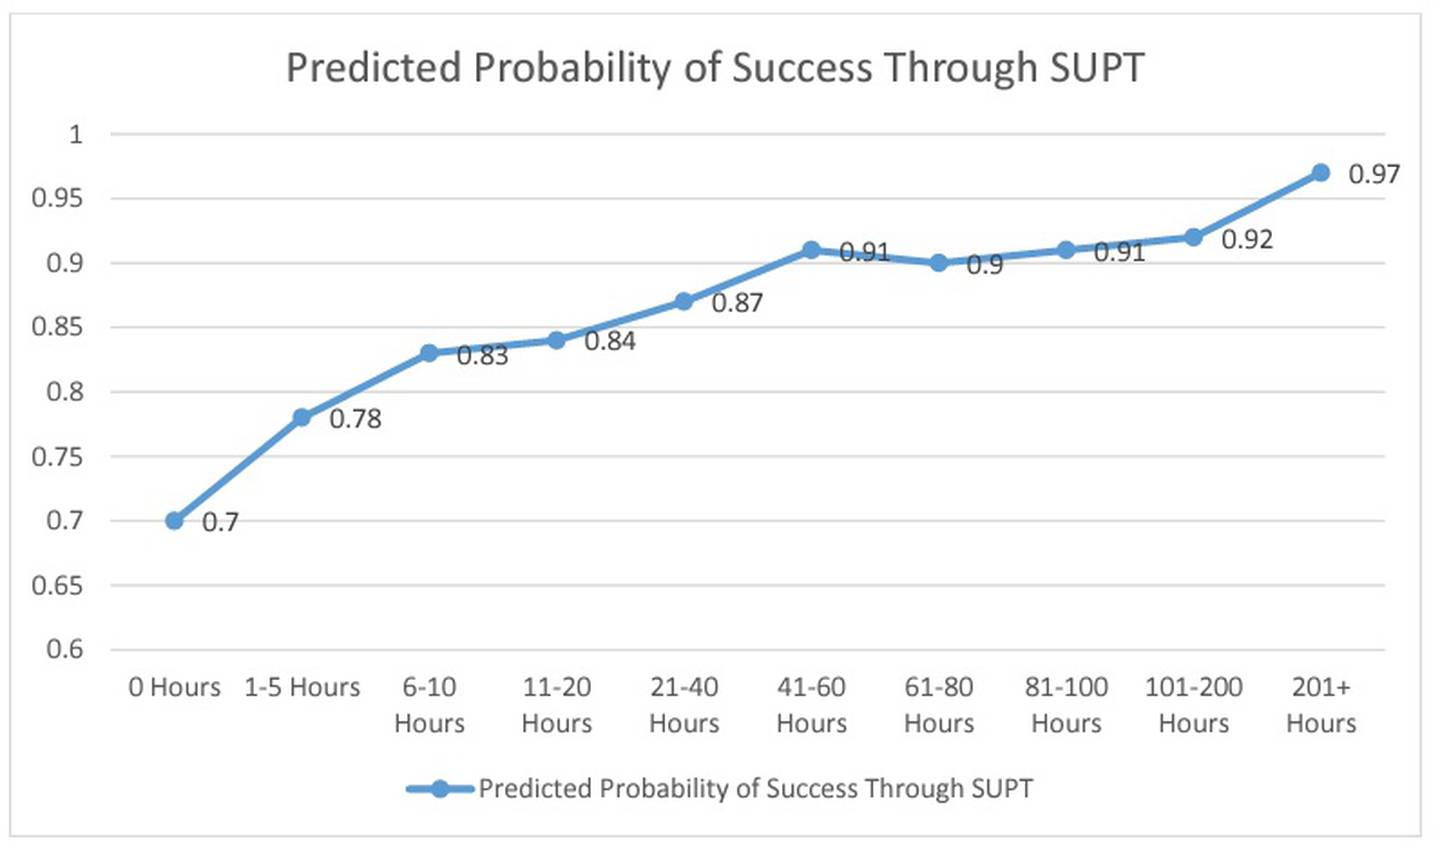 An Air Force analysis found that the predicted probability of success a a pilot increases substantially from 0 hours to 41-60 hours of prior experience in a cockpit, but relatively plateaus as hours continue to accumulate. Forty-one to 60 hours of FAA-approved flight hours is the range typically required for a private pilot’s license. (Air Force chart)